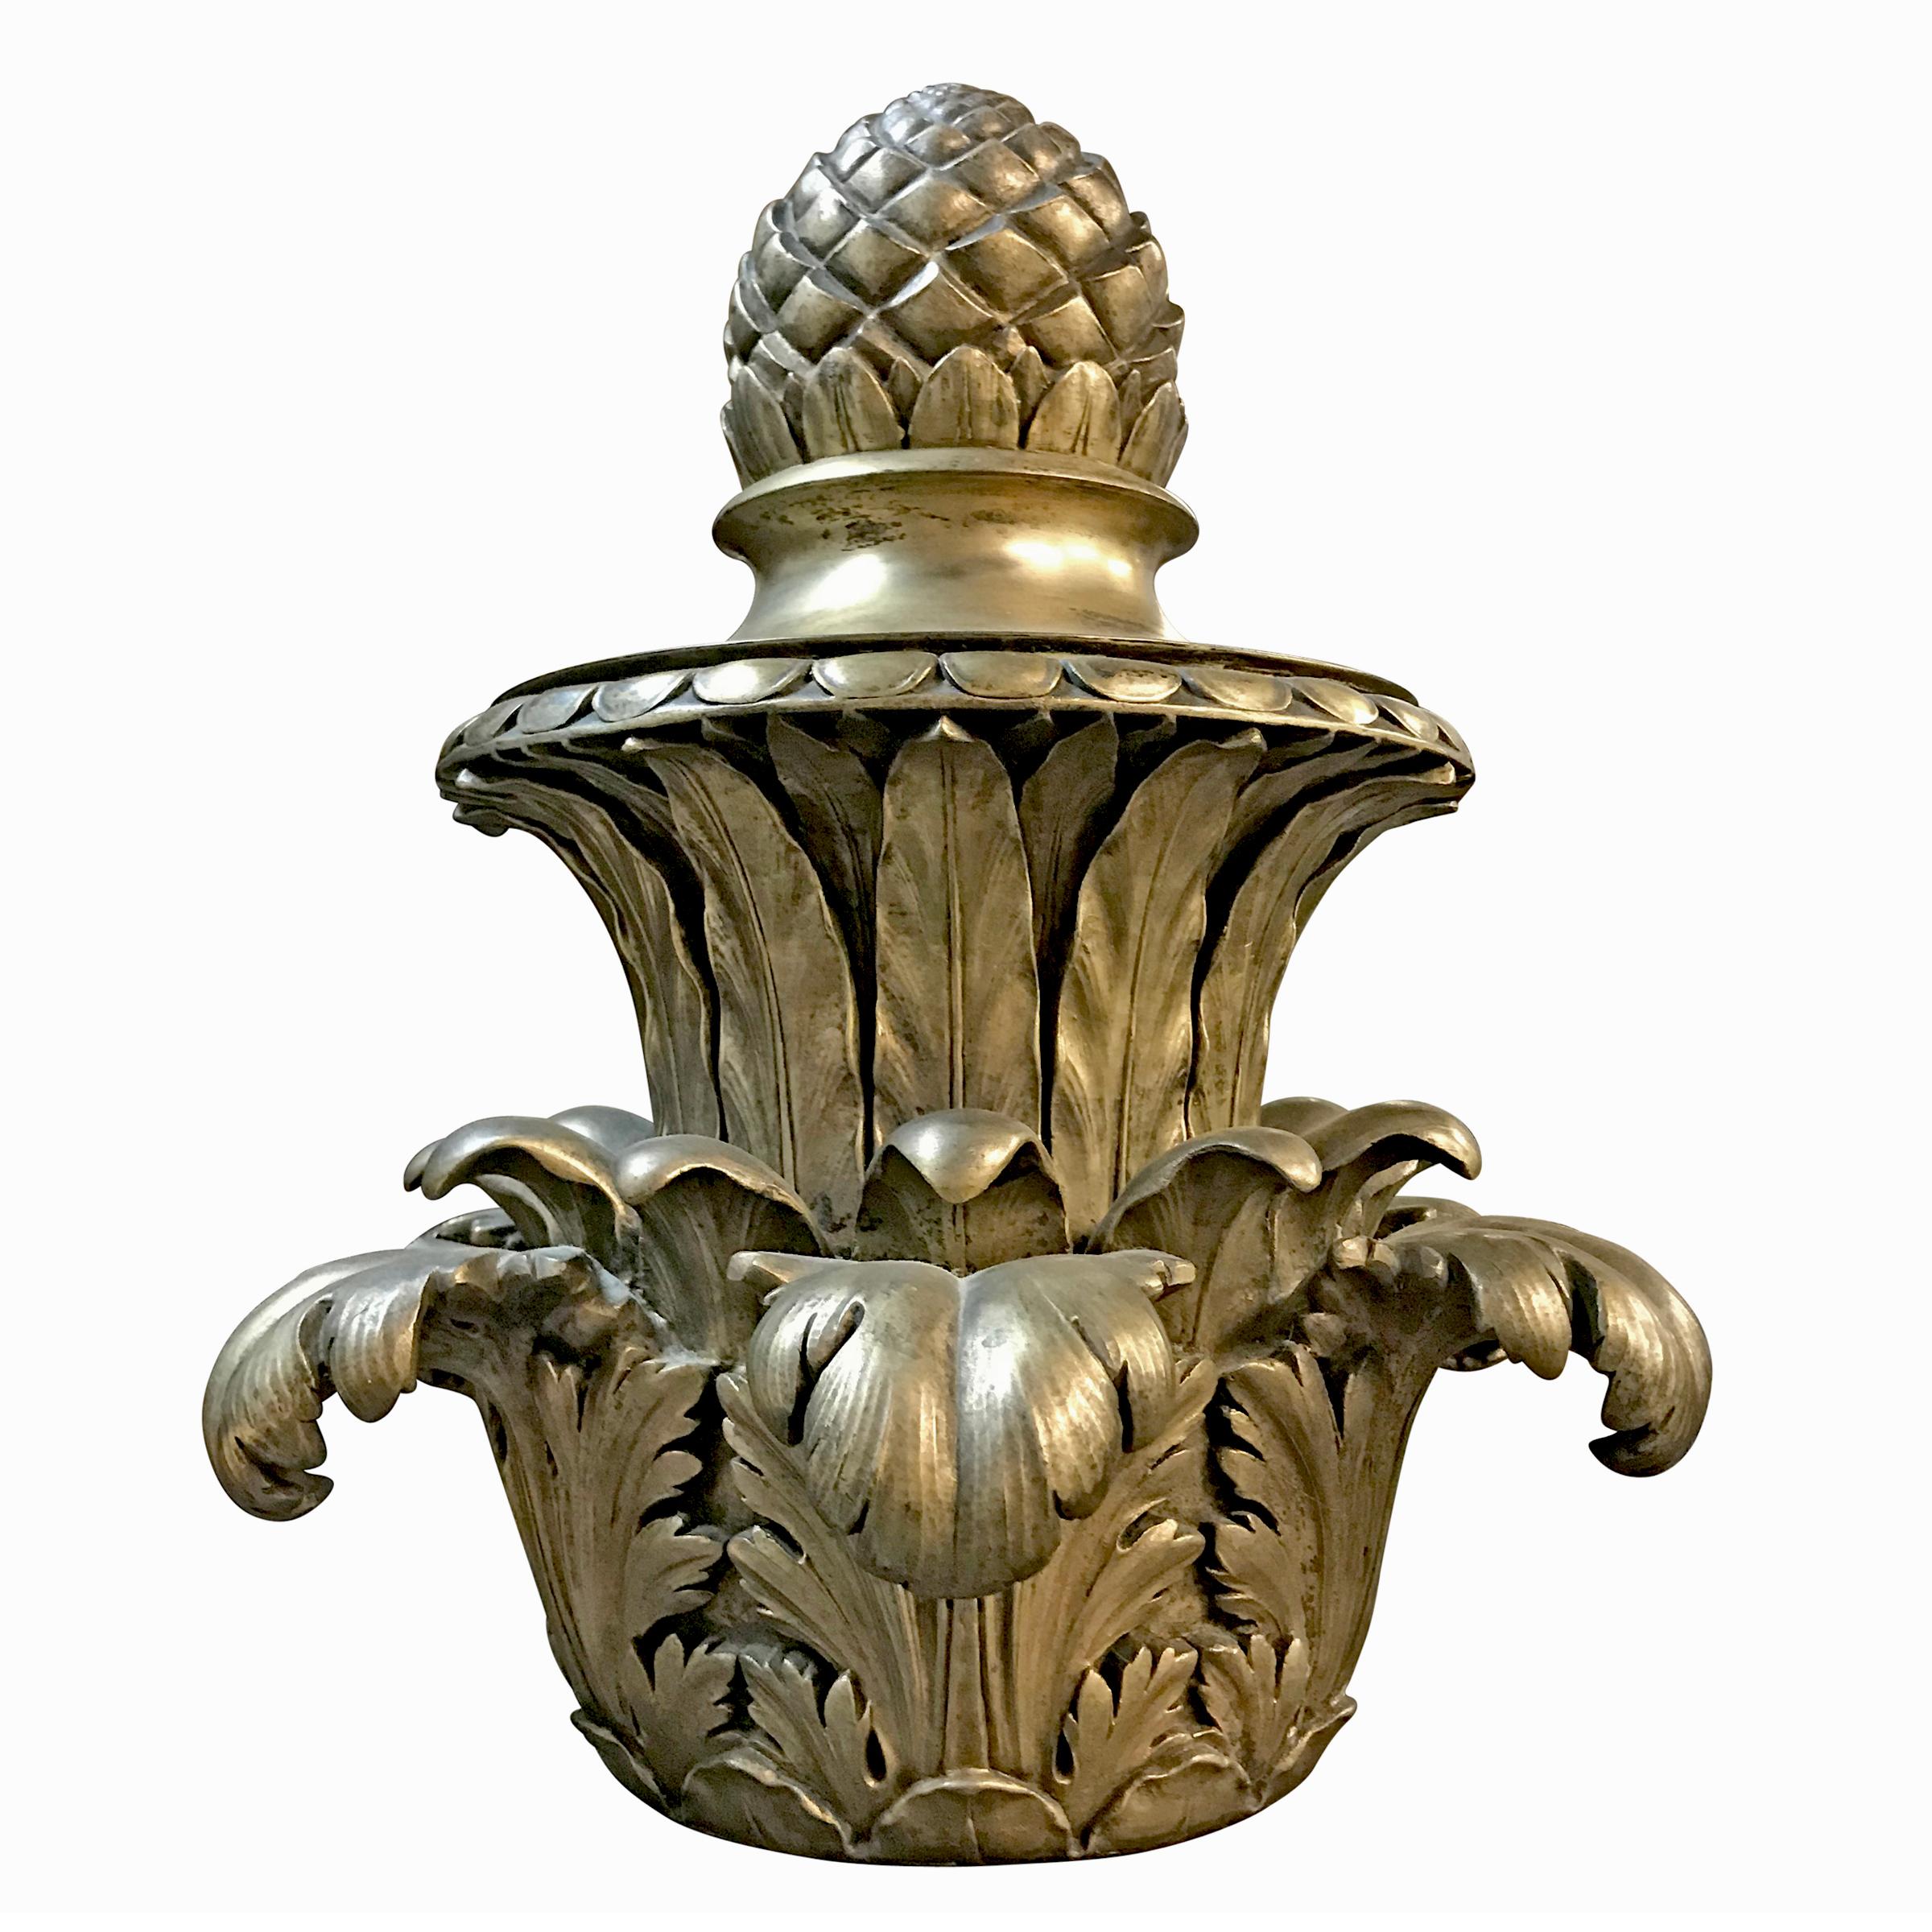 A fantastic pair of American nickel finished cast bronze acanthus leaf finials with pineapple tops, and wonderfully exaggerated leaves.